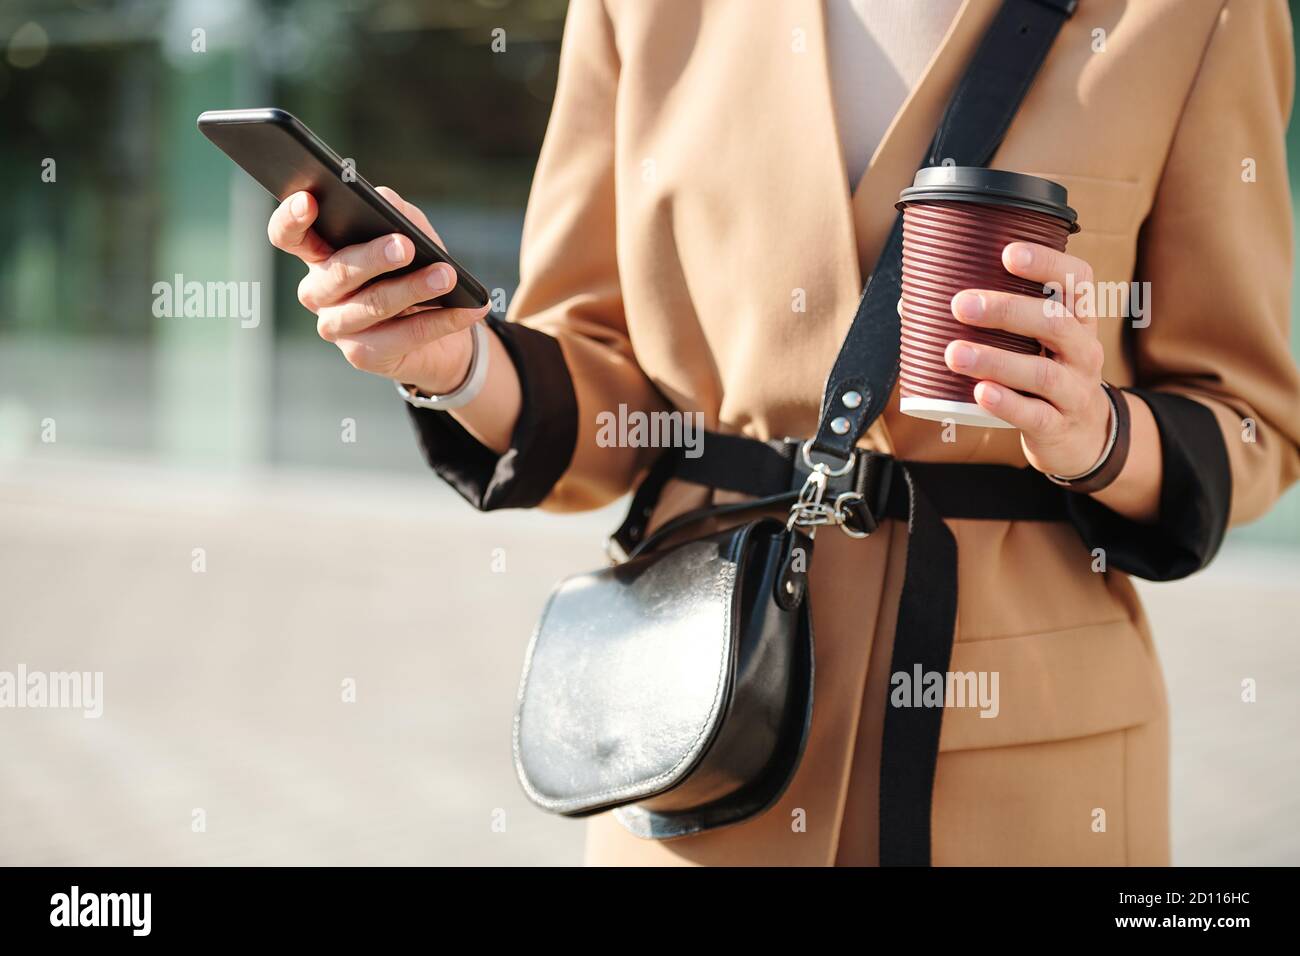 Hands of young elegant female with drink and handbag scrolling through contacts Stock Photo